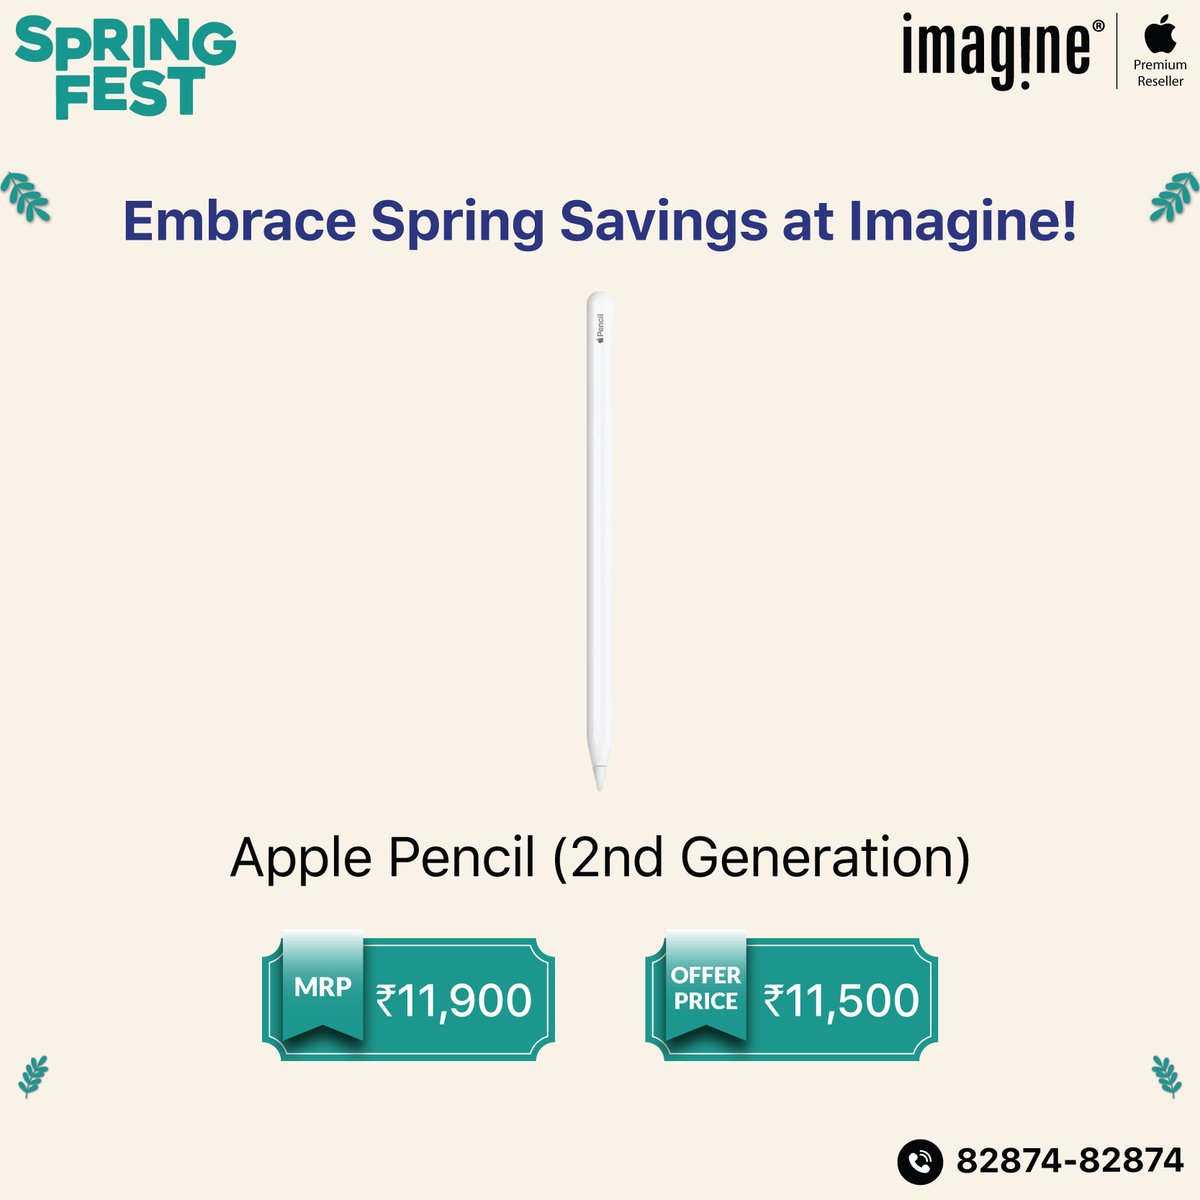 Embrace Spring Savings at Imagine! 🍃 Switch to latest iPad Air/iPad Pro now at Imagine! ✅ Upto ₹4,000* Instant Cashback on ICICI Bank Debit and Credit cards and SBI Credit cards. ✅ Upto ₹3,000* Instant In-store discount ✅ Get speaker worth ₹10,900* ✅ GST Invoice